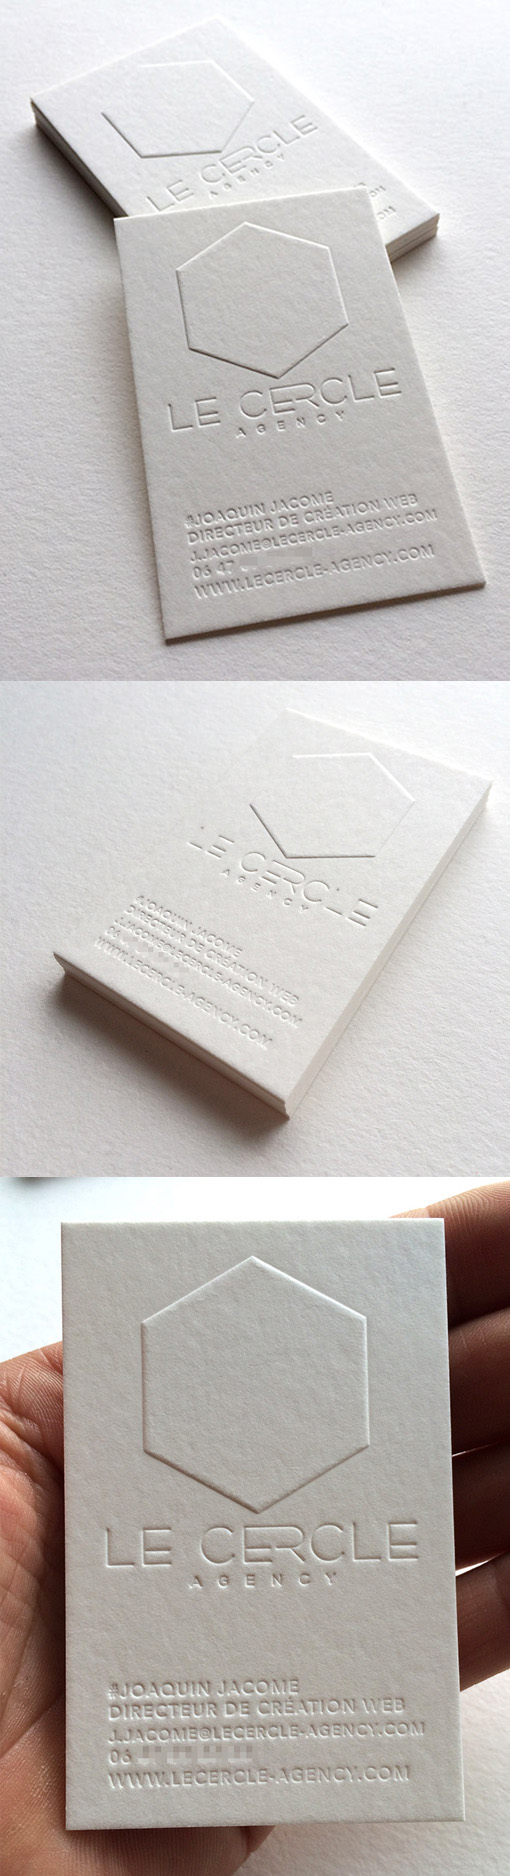 Pure White Embossed Minimalist Letterpress Business Card For A Creative Agency